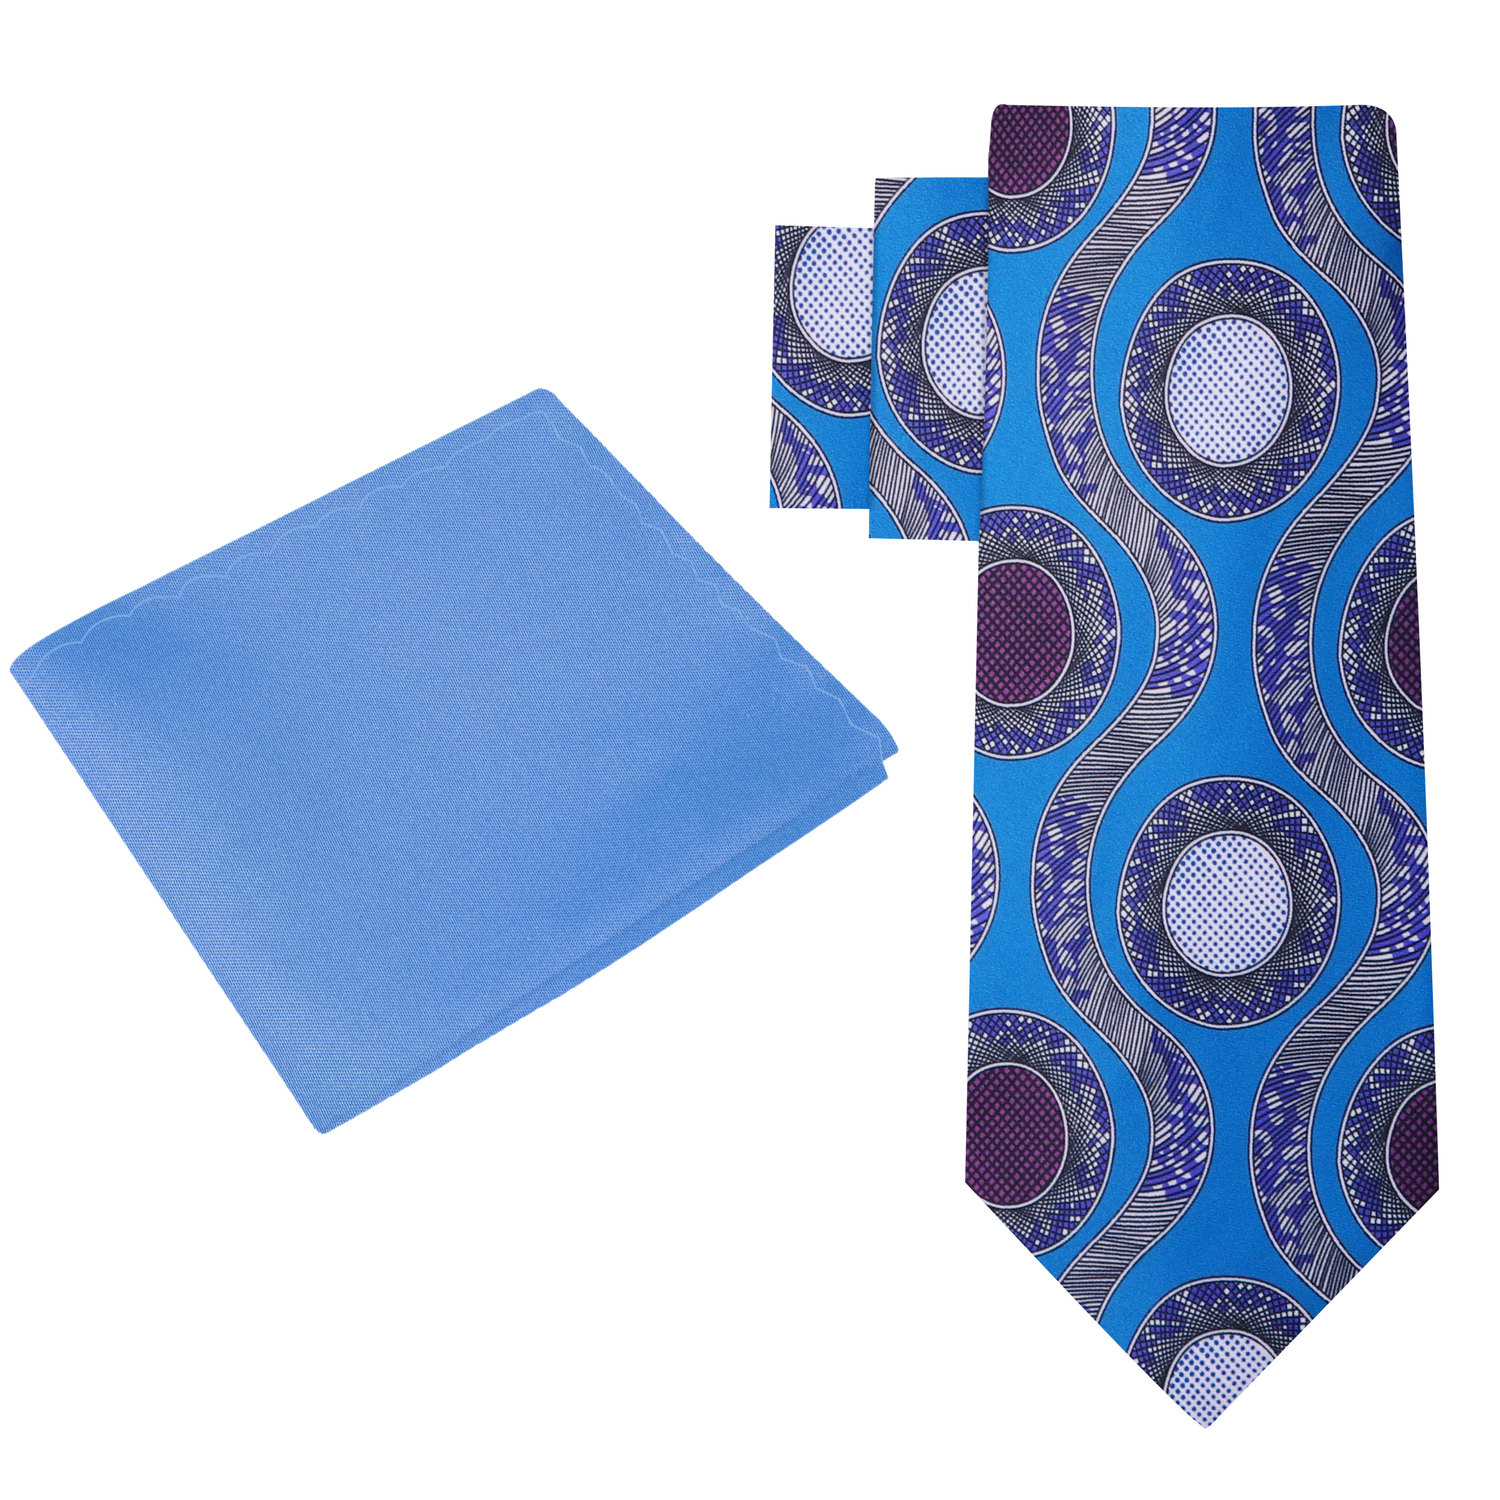 Alt View: Blue, Plum, Purple Abstract Necktie and Solid Blue Square